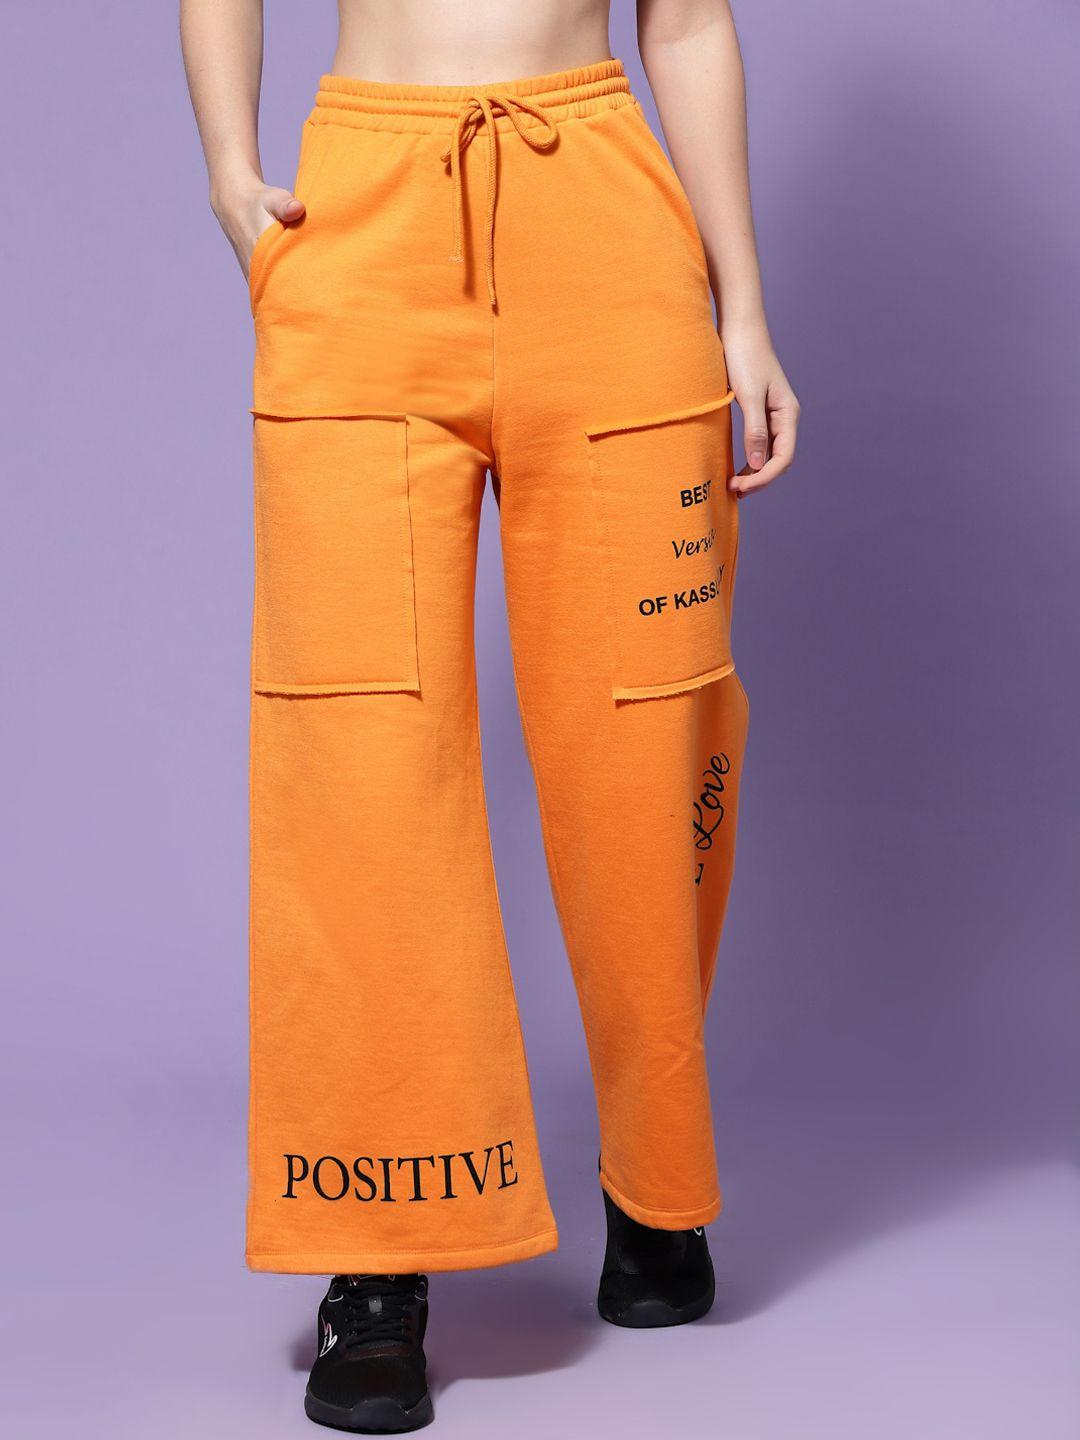 kassually-typography-loose-fit-cargos-trousers